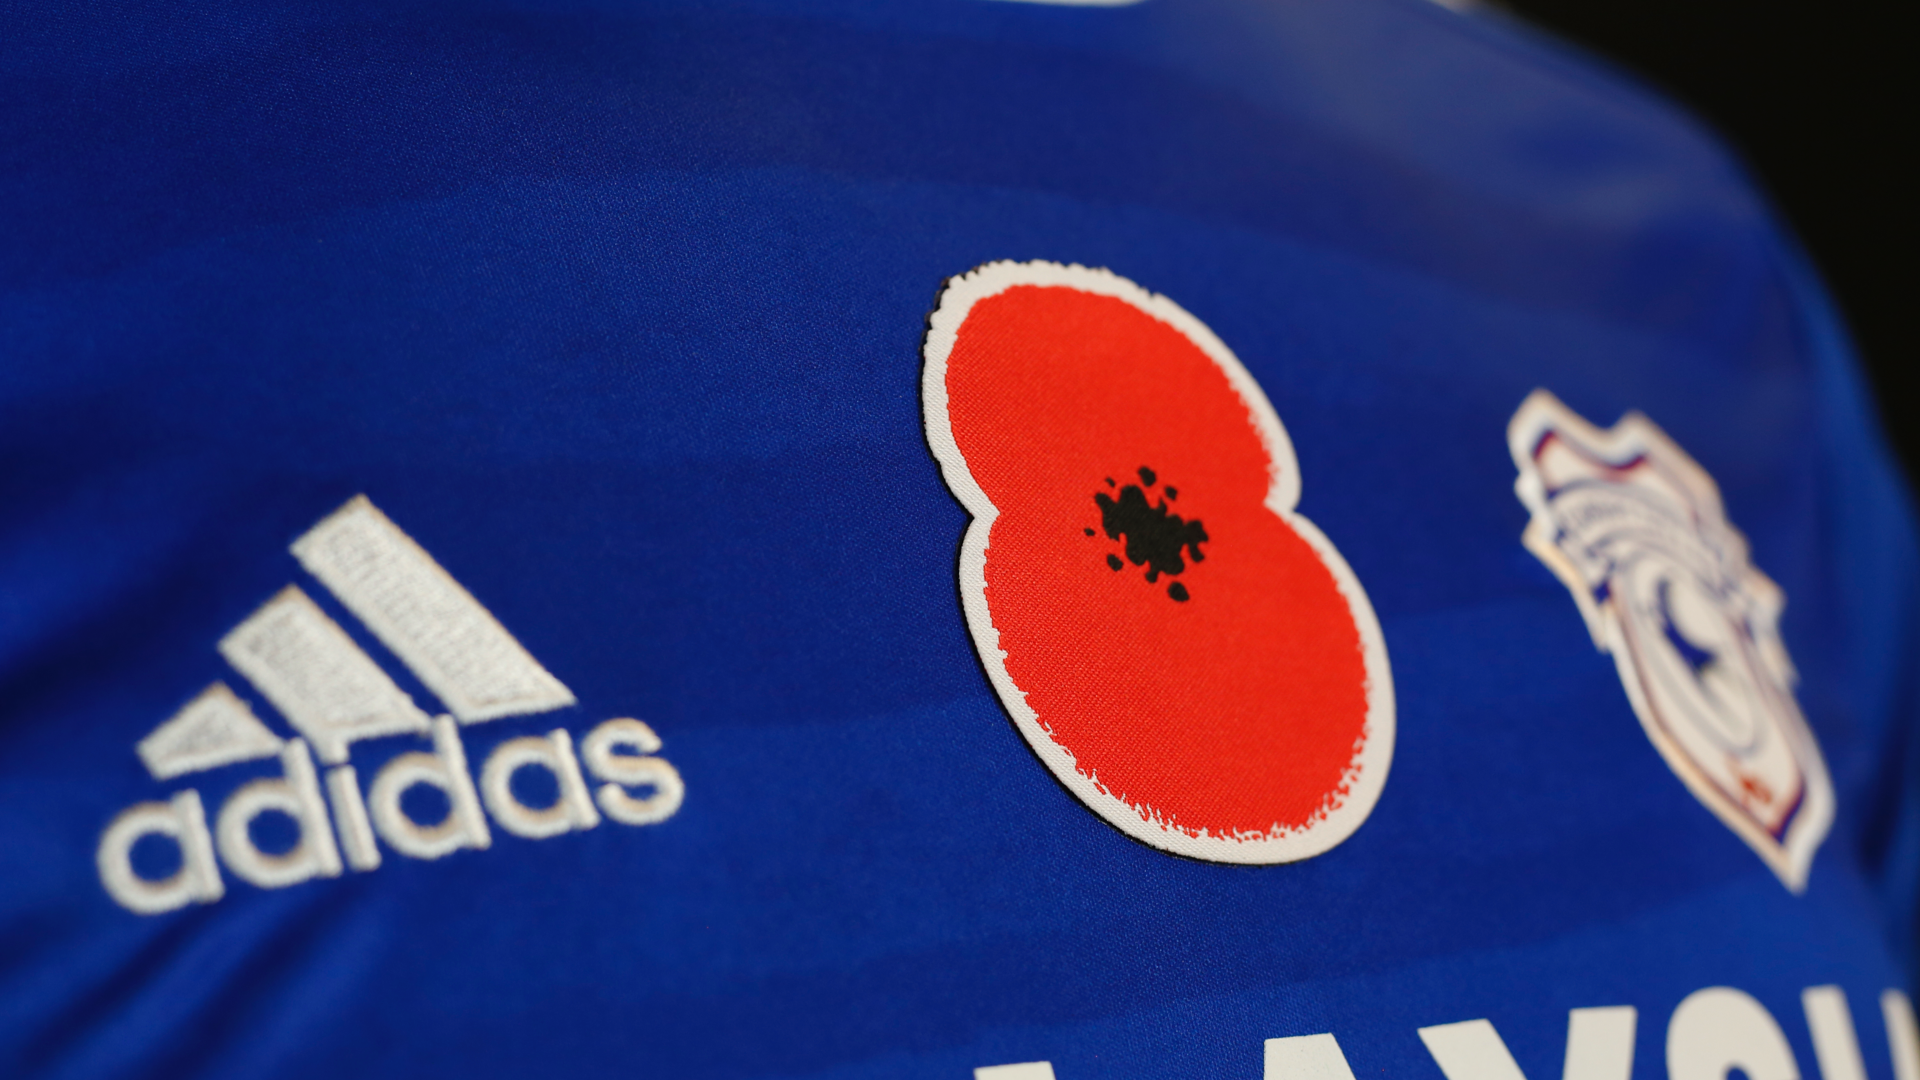 The Bluebirds show their support for the Royal British Legion...